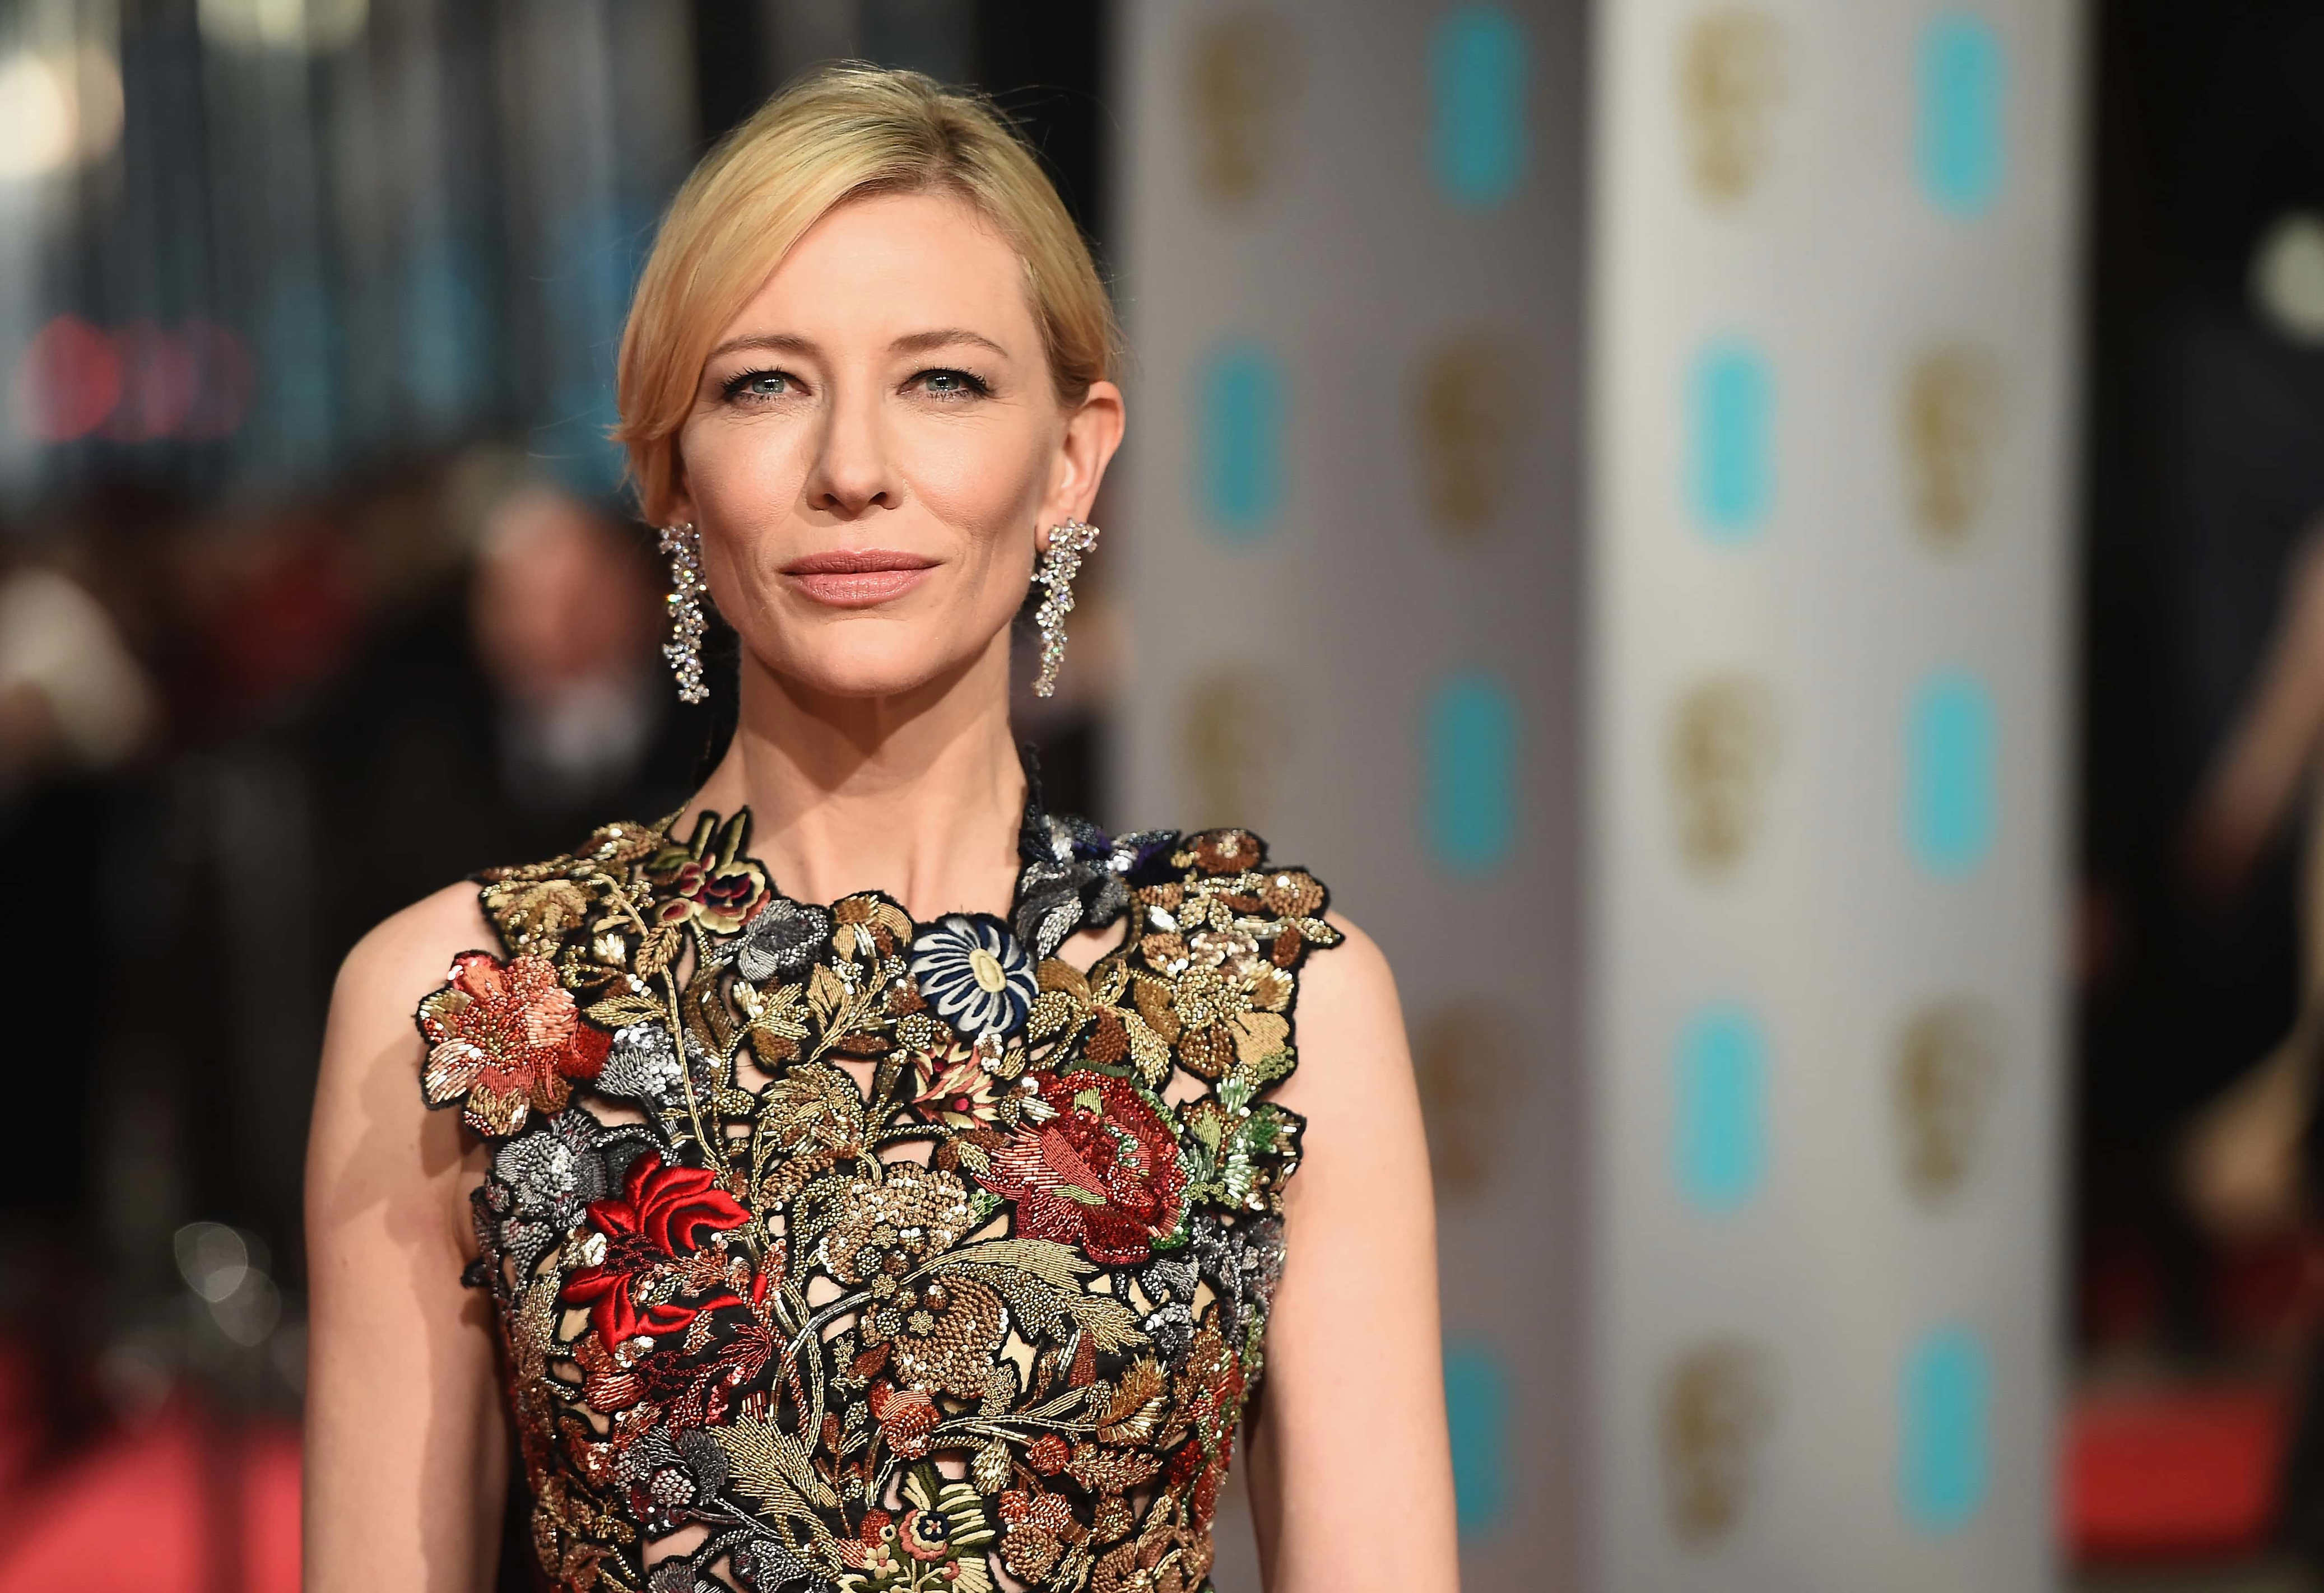 <p>Unsurprisingly, as Goddess of Death, Hela does a lot of fighting in <em>Ragnarok</em>. To prepare for the role, Cate Blanchett studied the Brazilian martial art capoeira.</p>